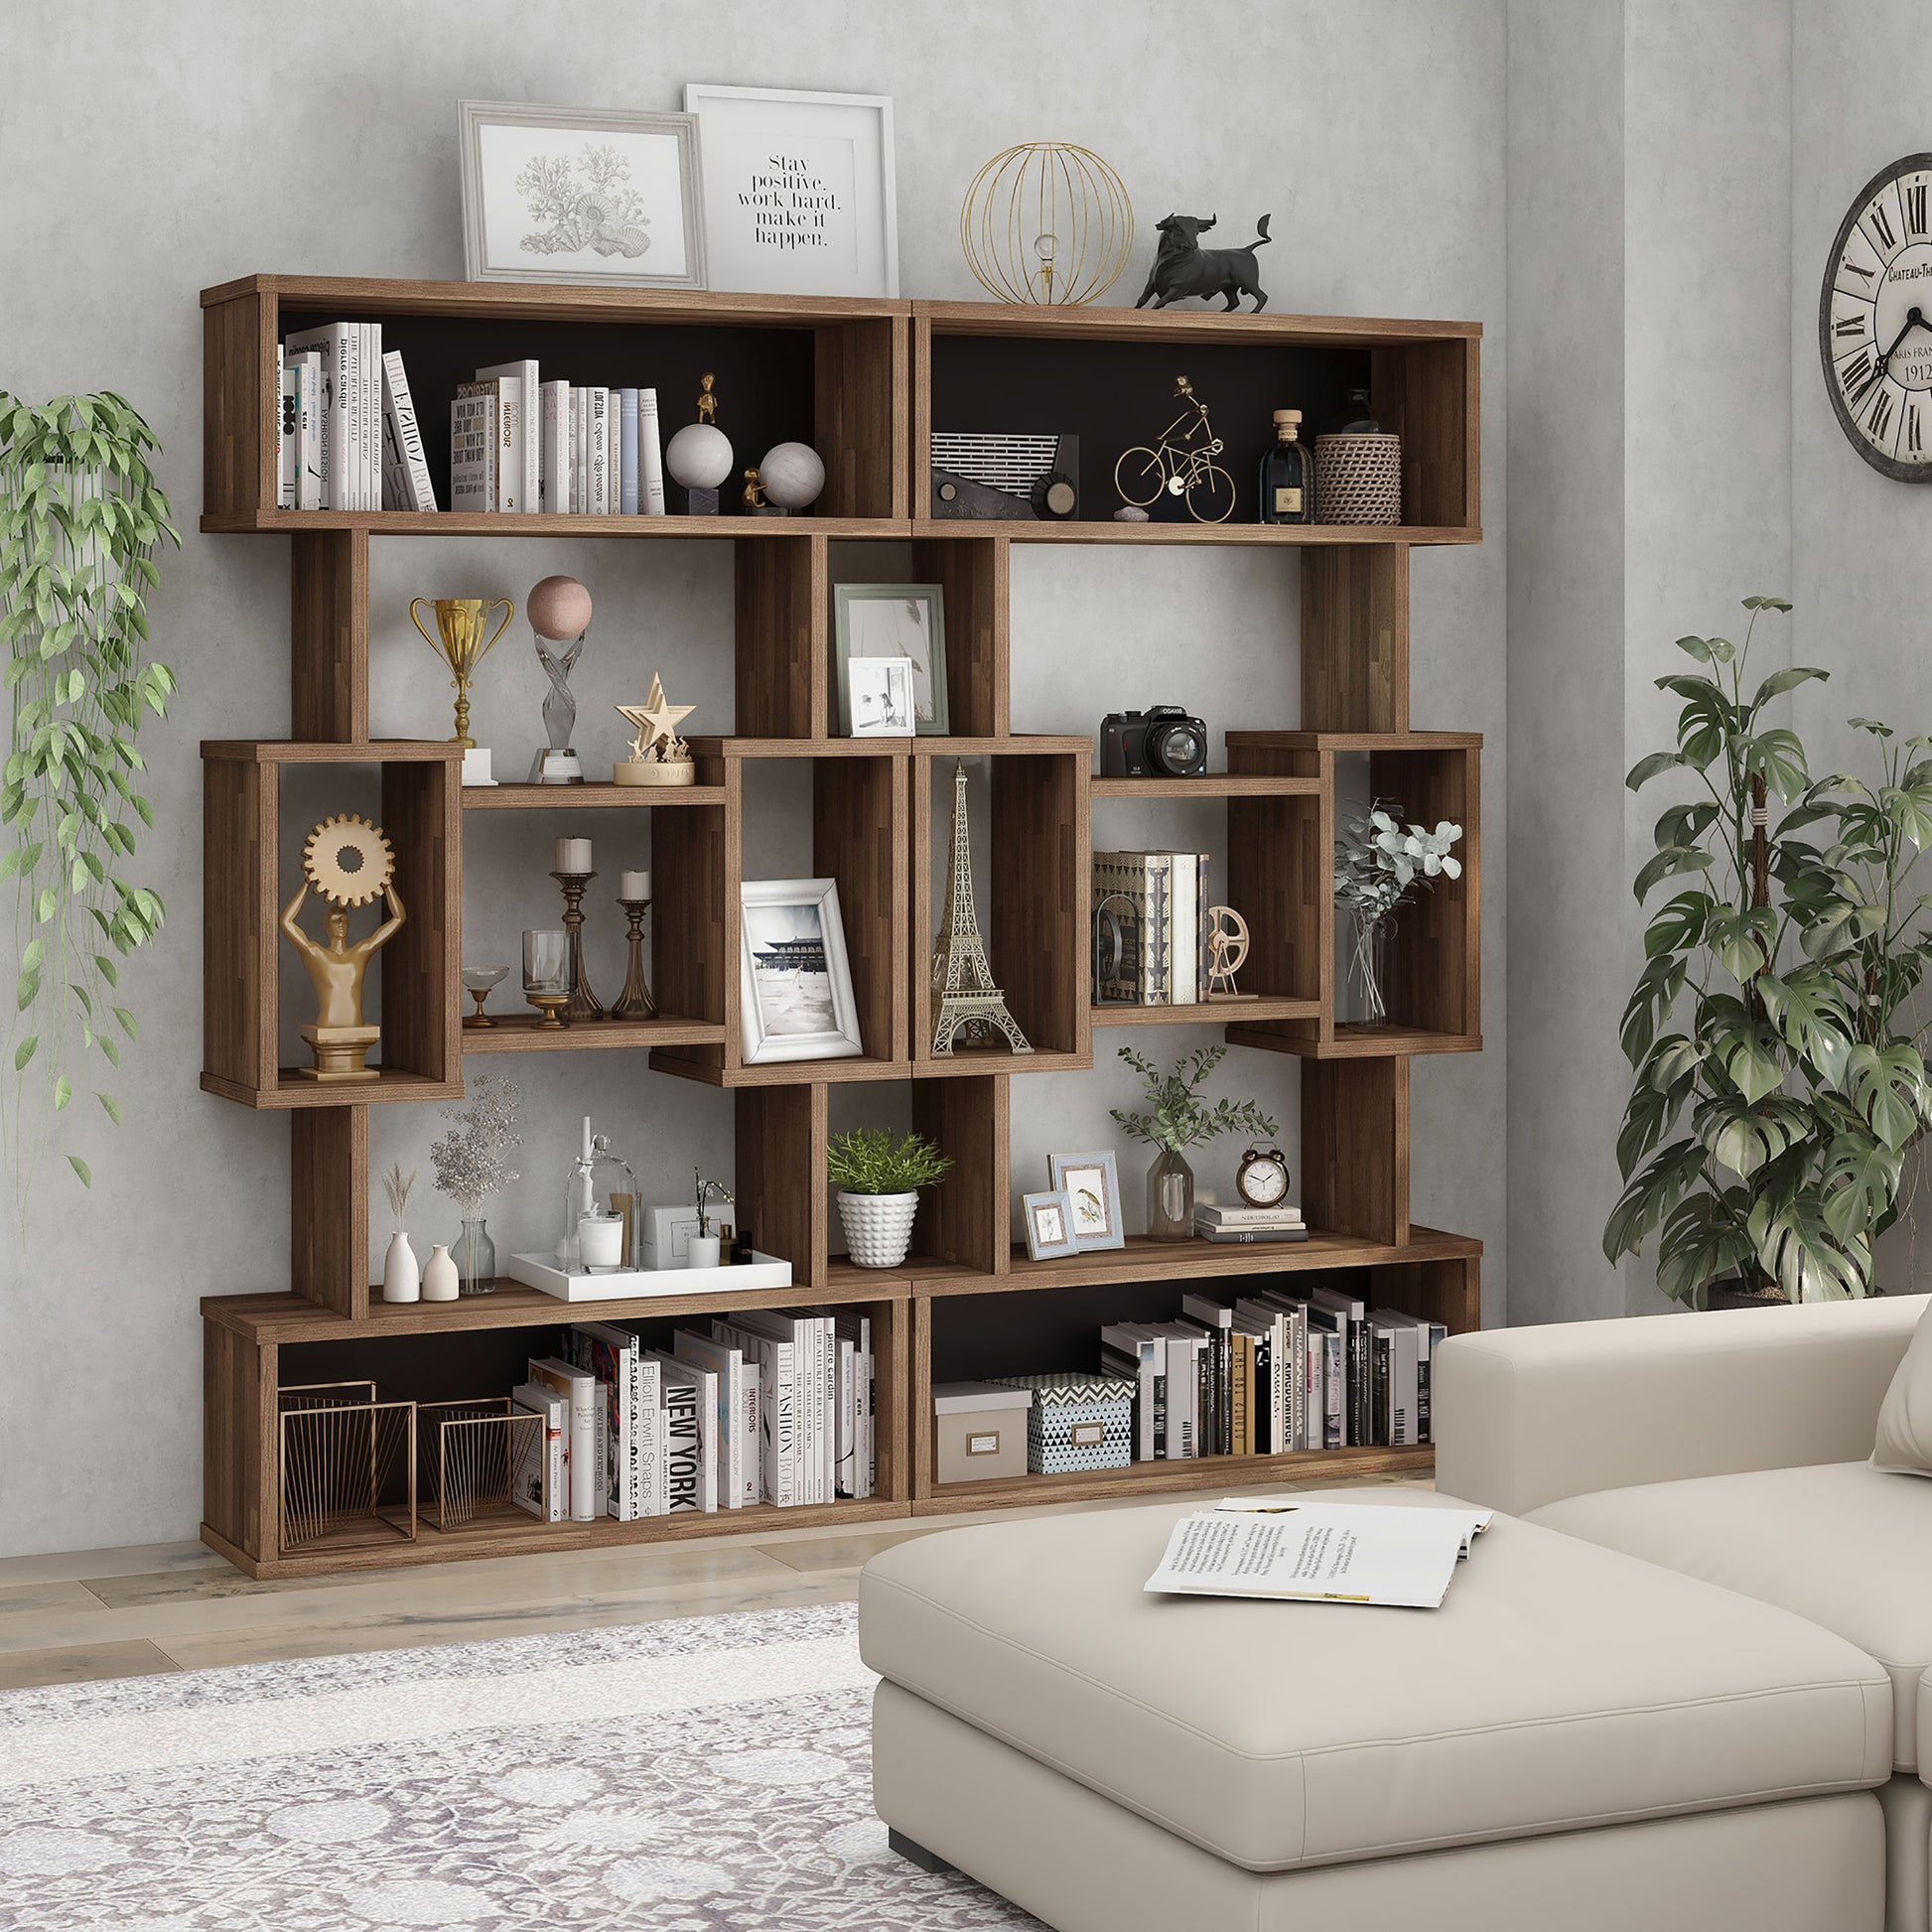 Right angled modern light hickory open cubic bookcase display shelf in a living room with accessories (shown as set of two)